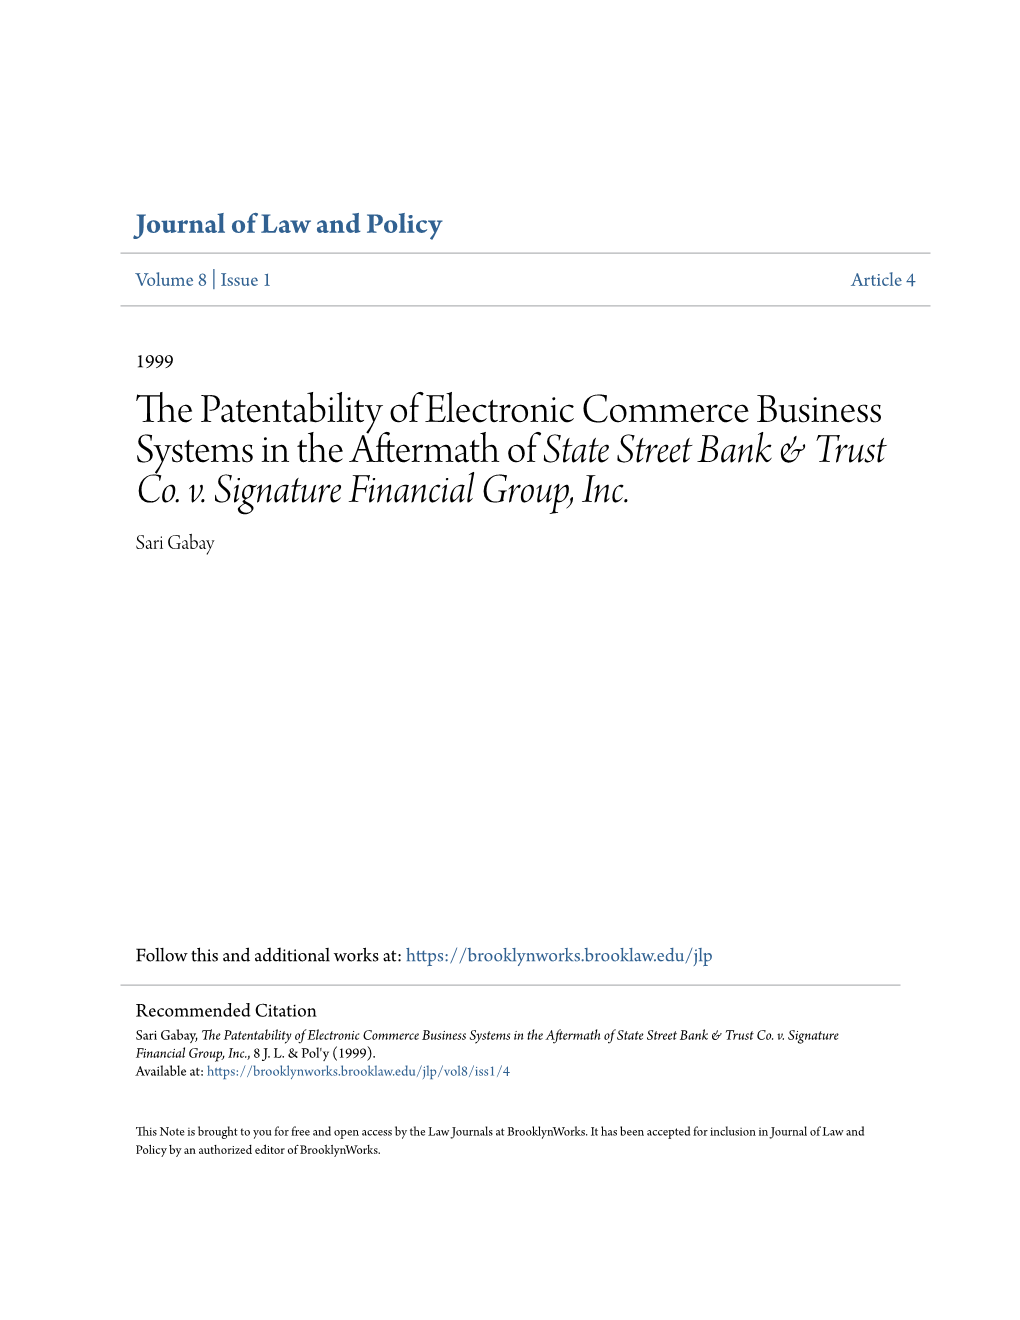 The Patentability of Electronic Commerce Business Systems in the Aftermath of State Street Bank & Trust Co